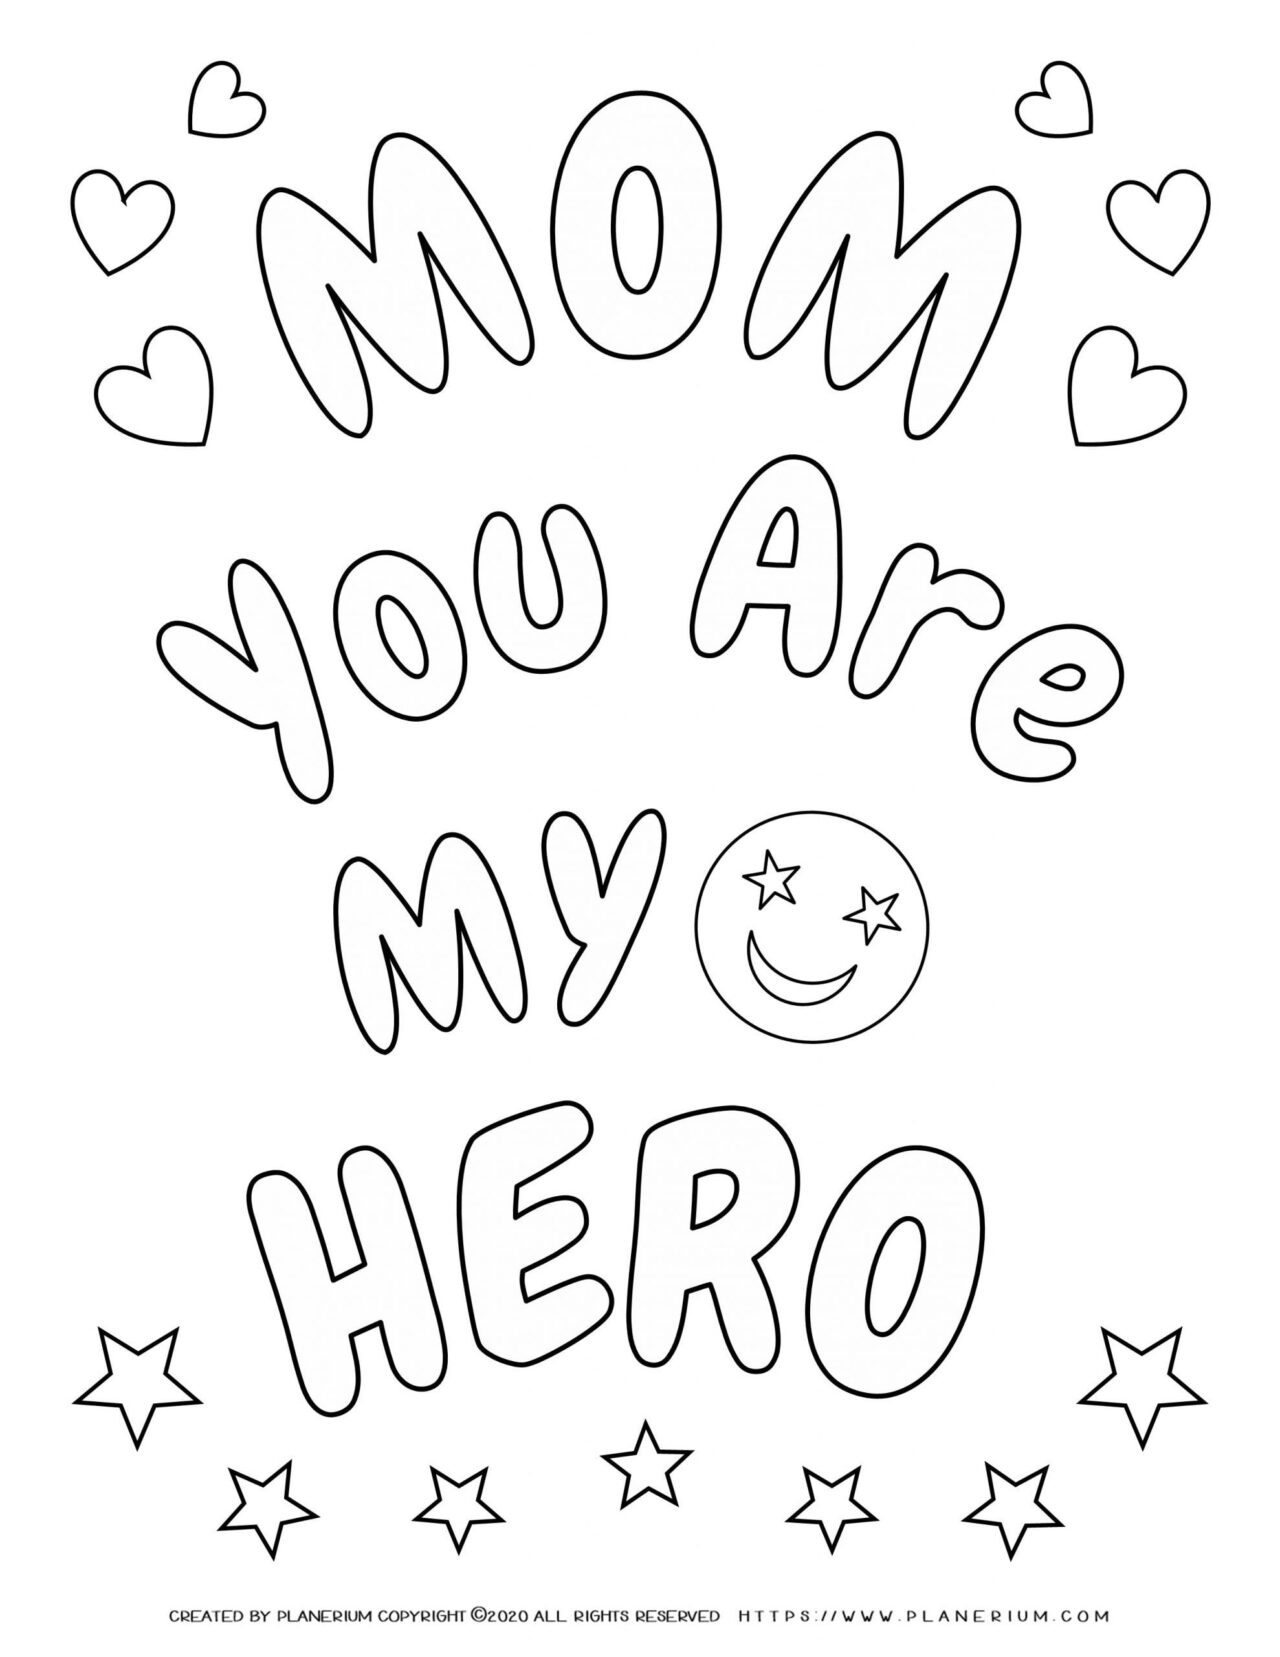 Mother's Day Coloring Page - "Mom, You Are My Hero"